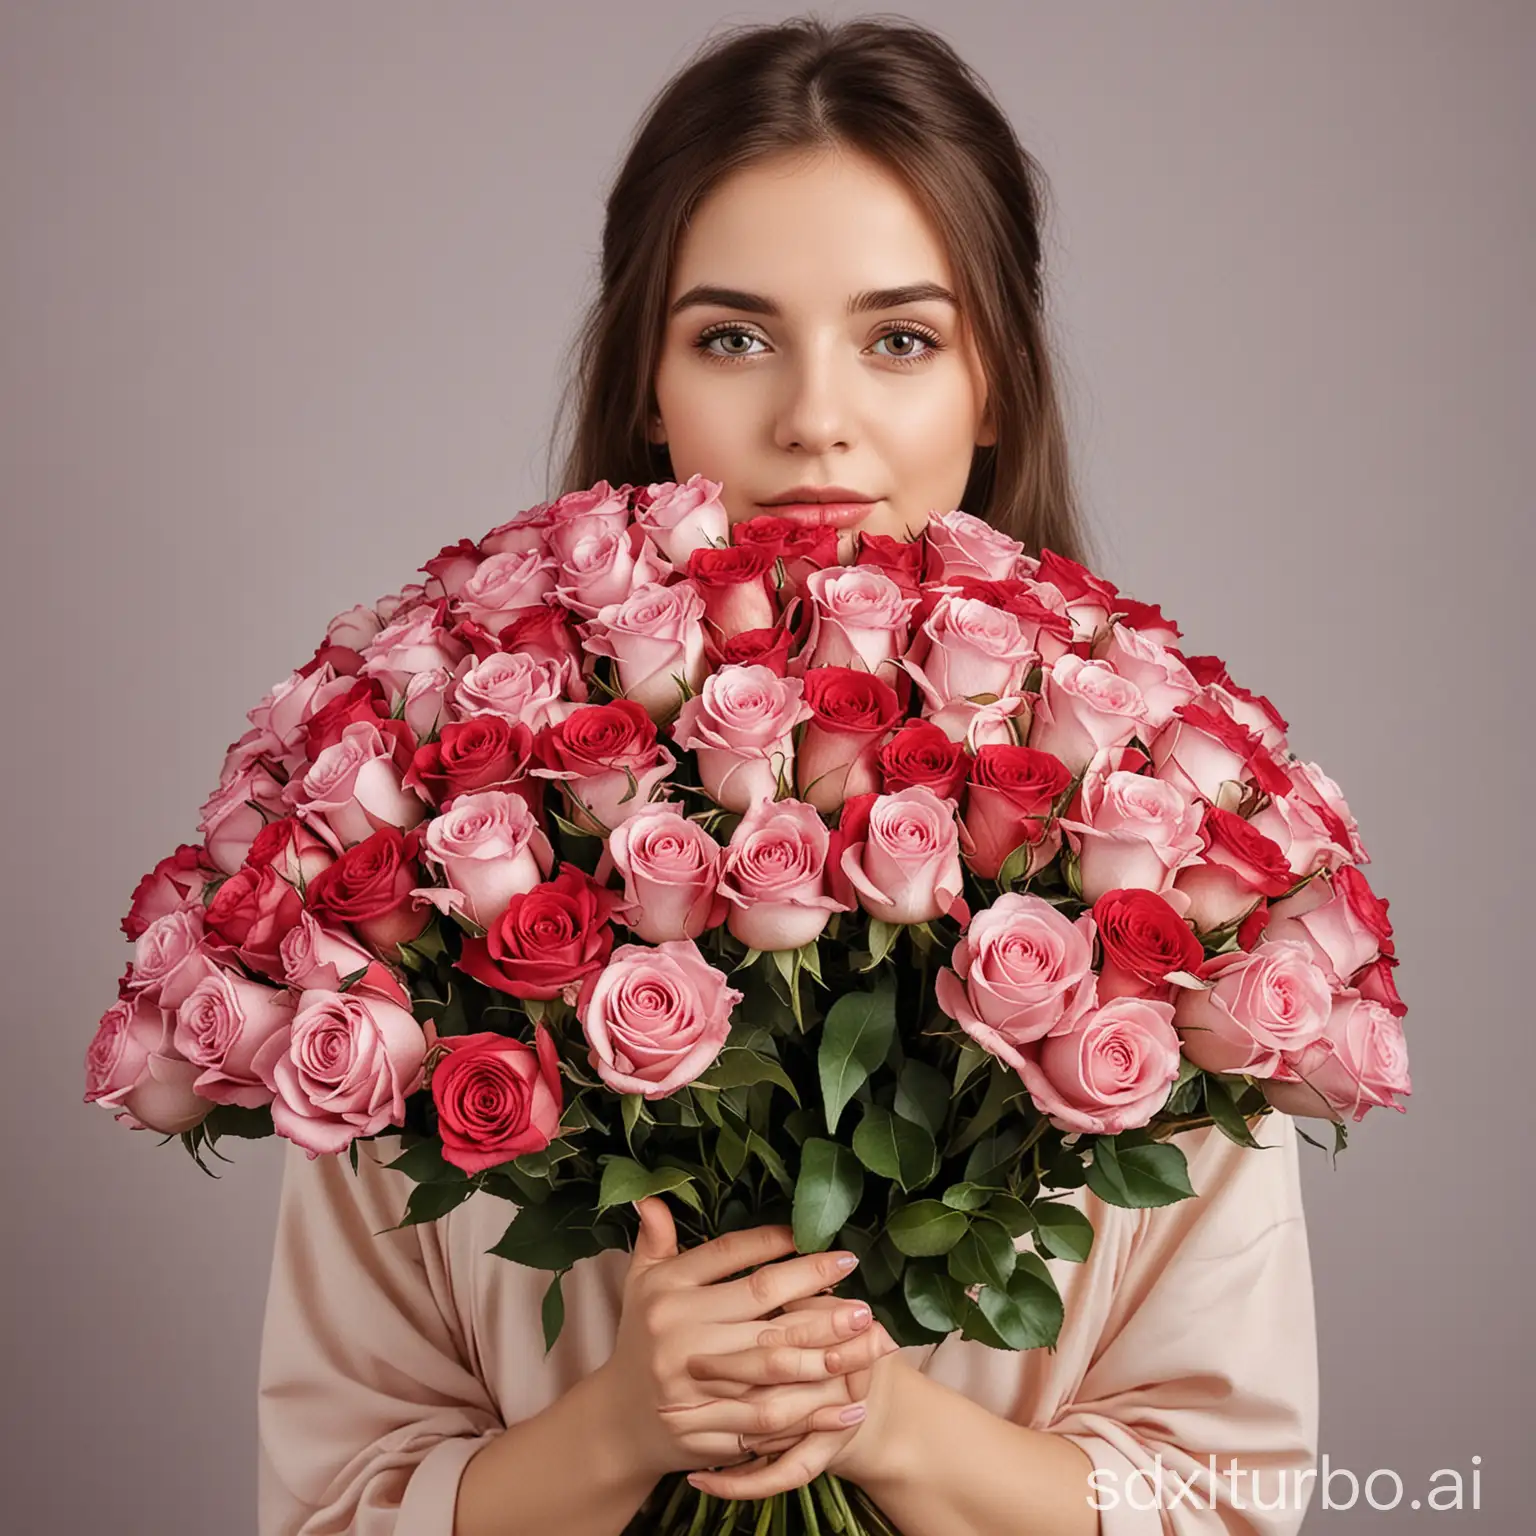 Girl-Holding-Bouquet-of-Roses-Concealing-Face-with-Flowers